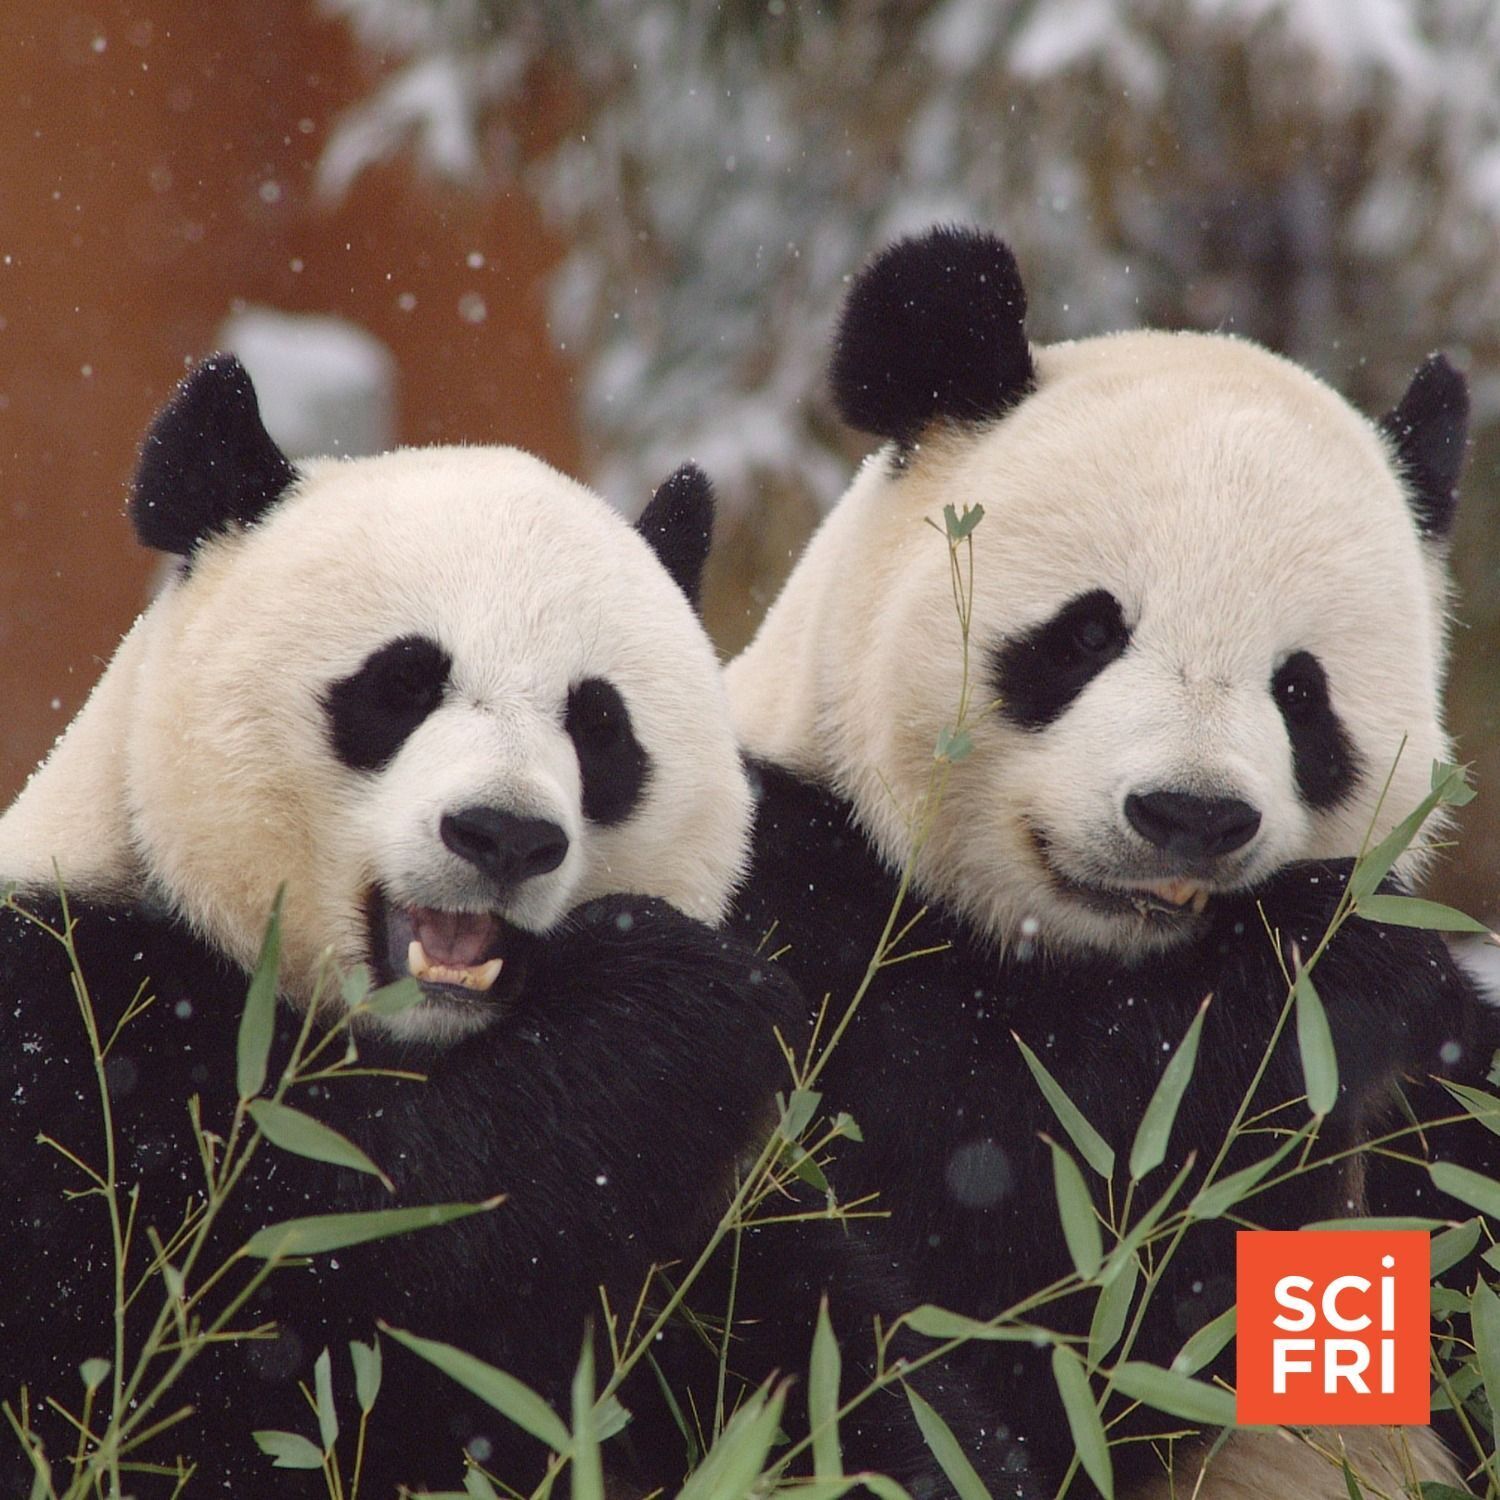 672: How ’Panda Diplomacy’ Led To Conservation Success